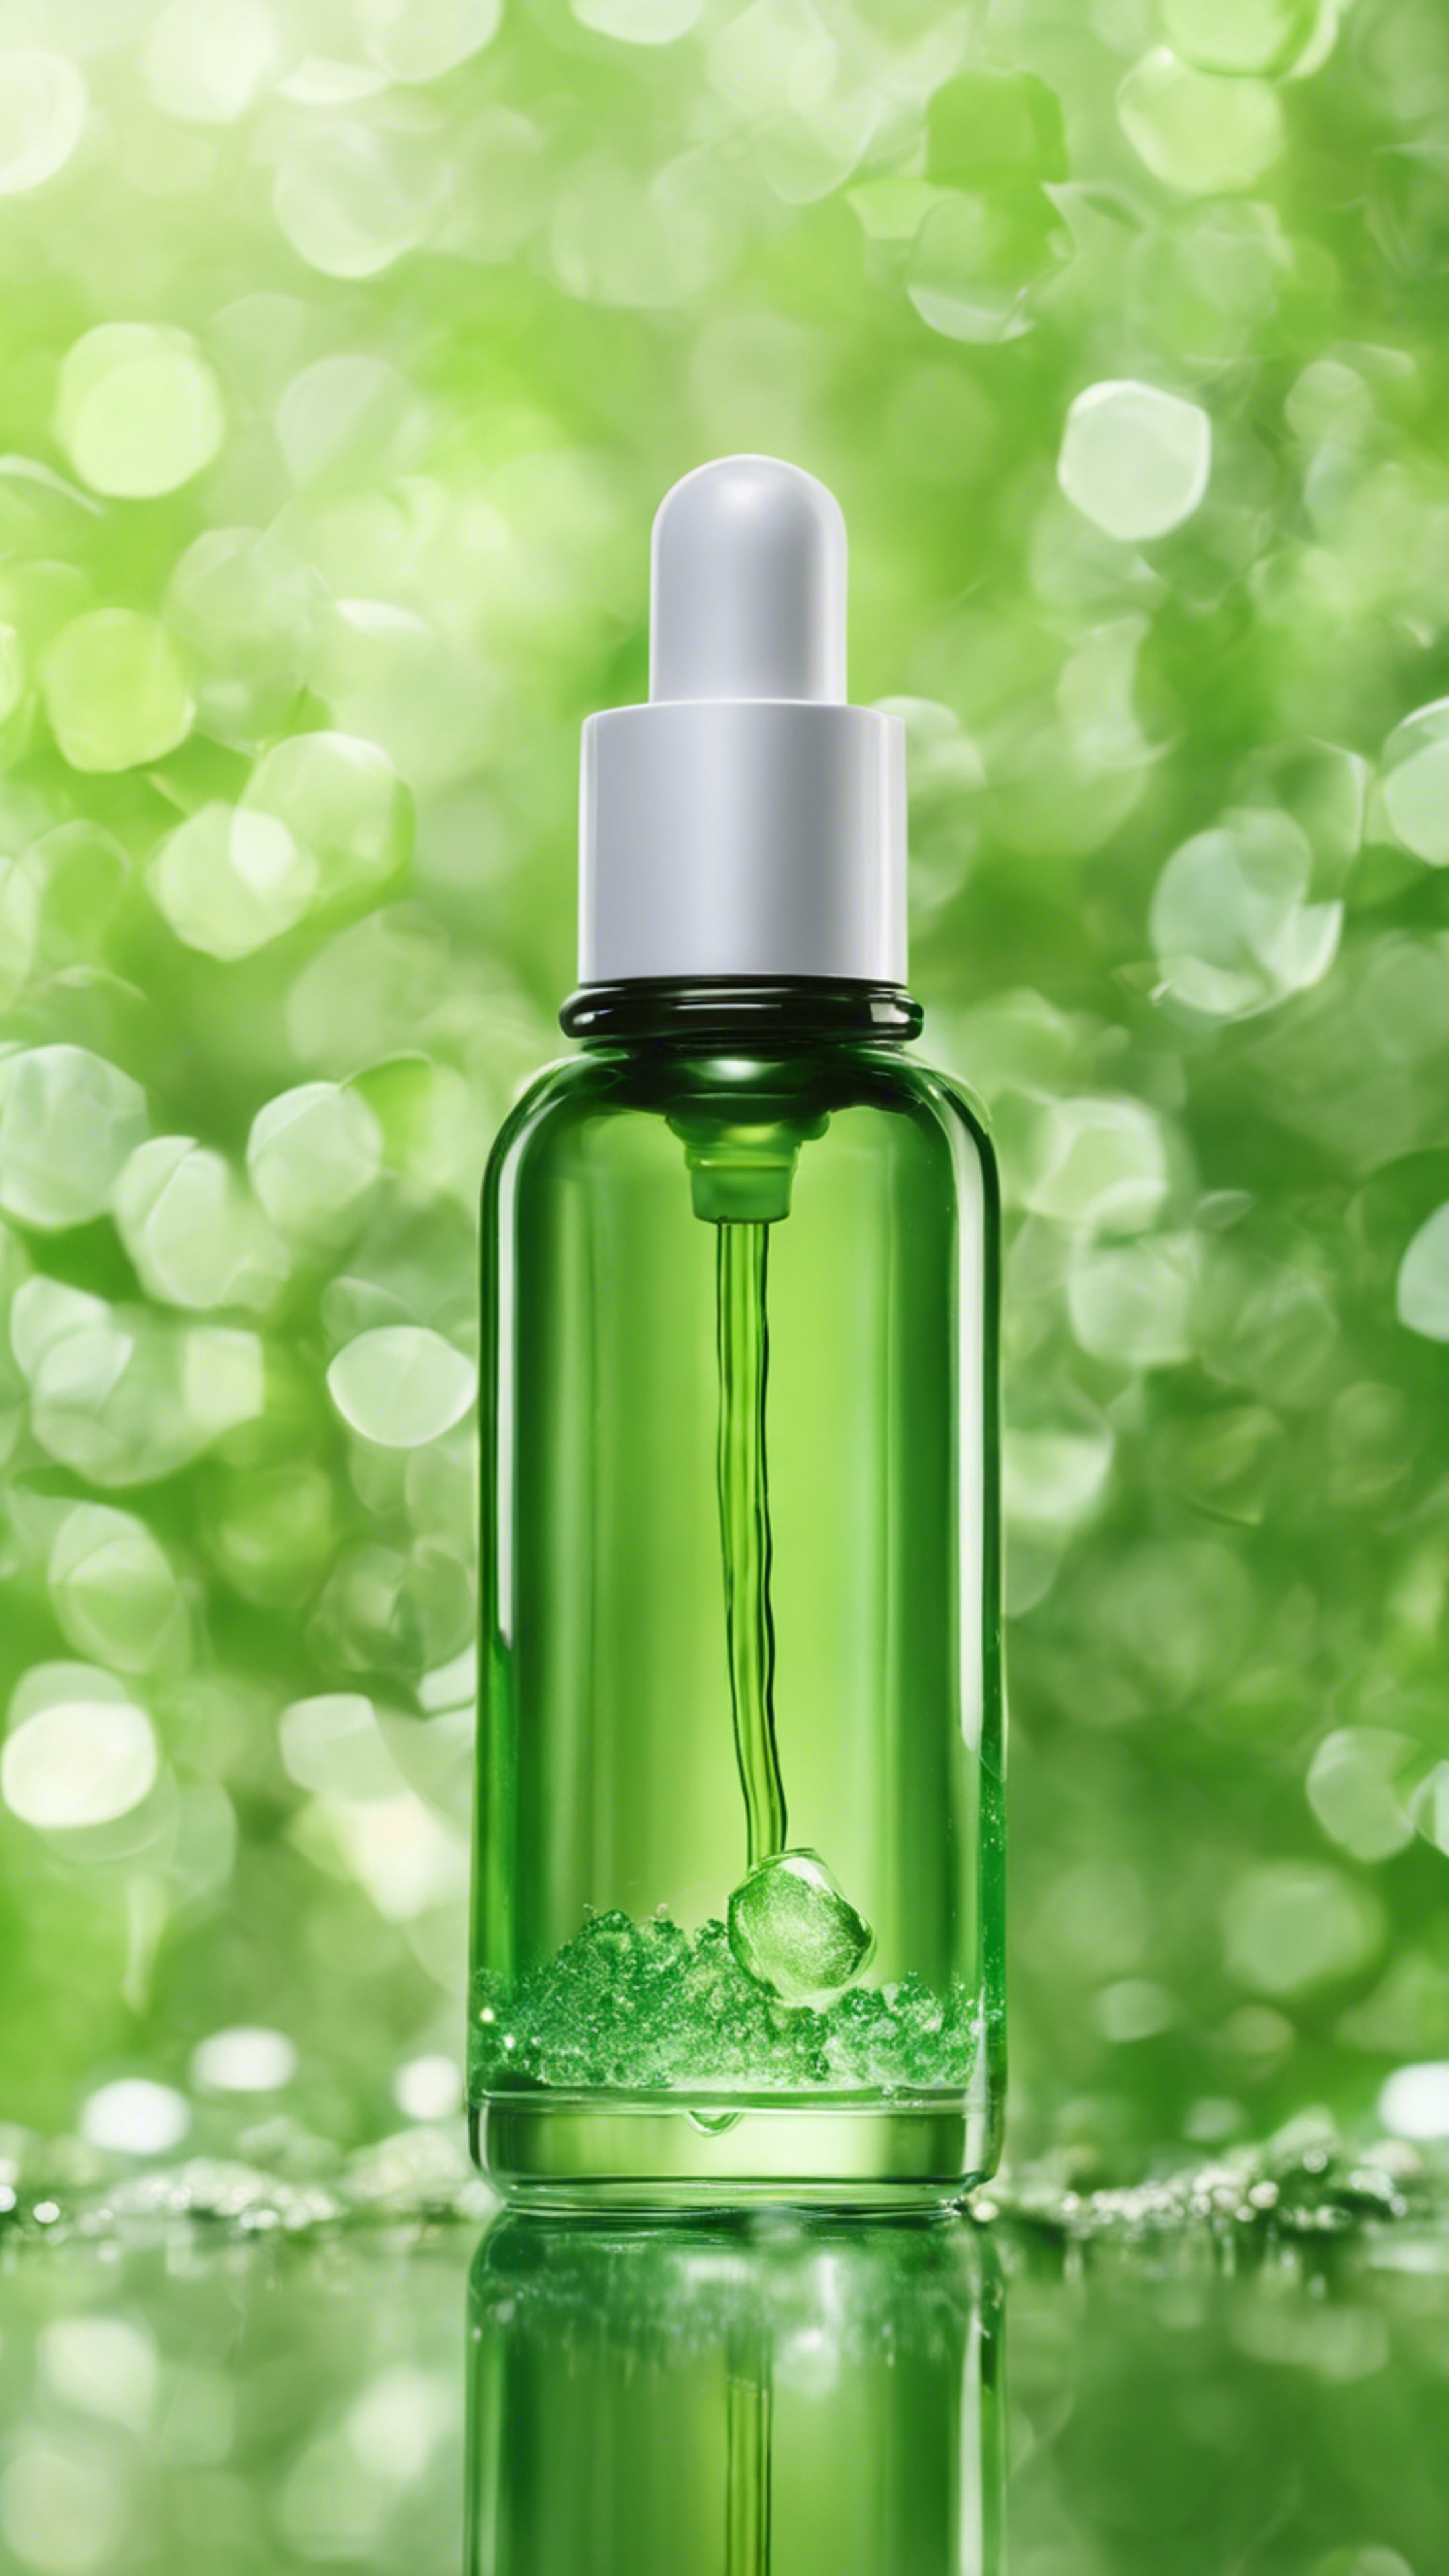 Green an eco-friendly cosmetics company's new hydrating face serum in a recyclable glass bottle. Tapeet[04a9344189e843ad9259]